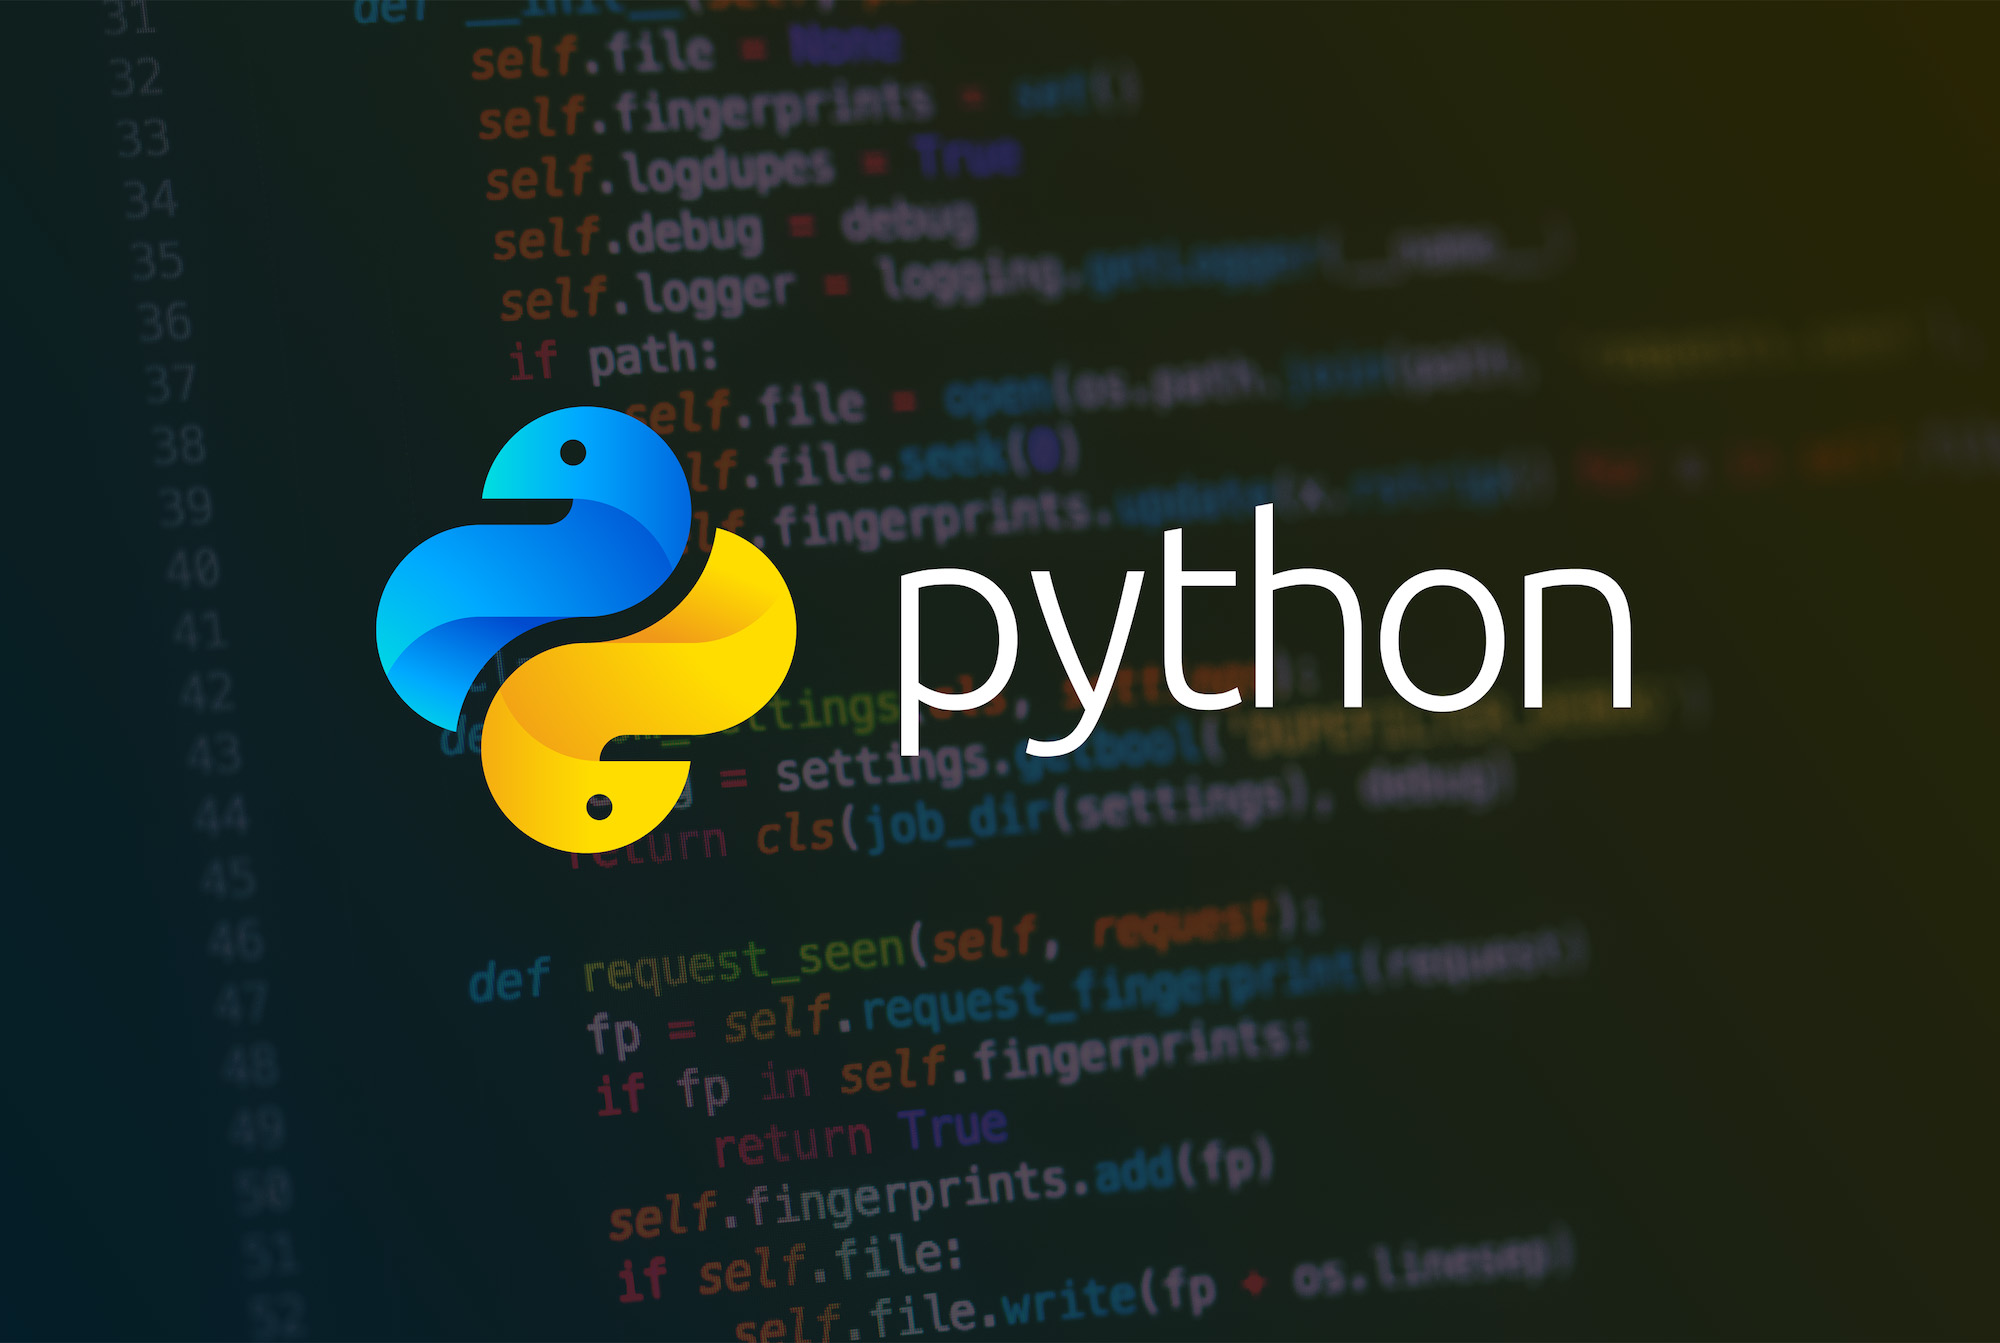 Python: how to download images for prototyping web apps